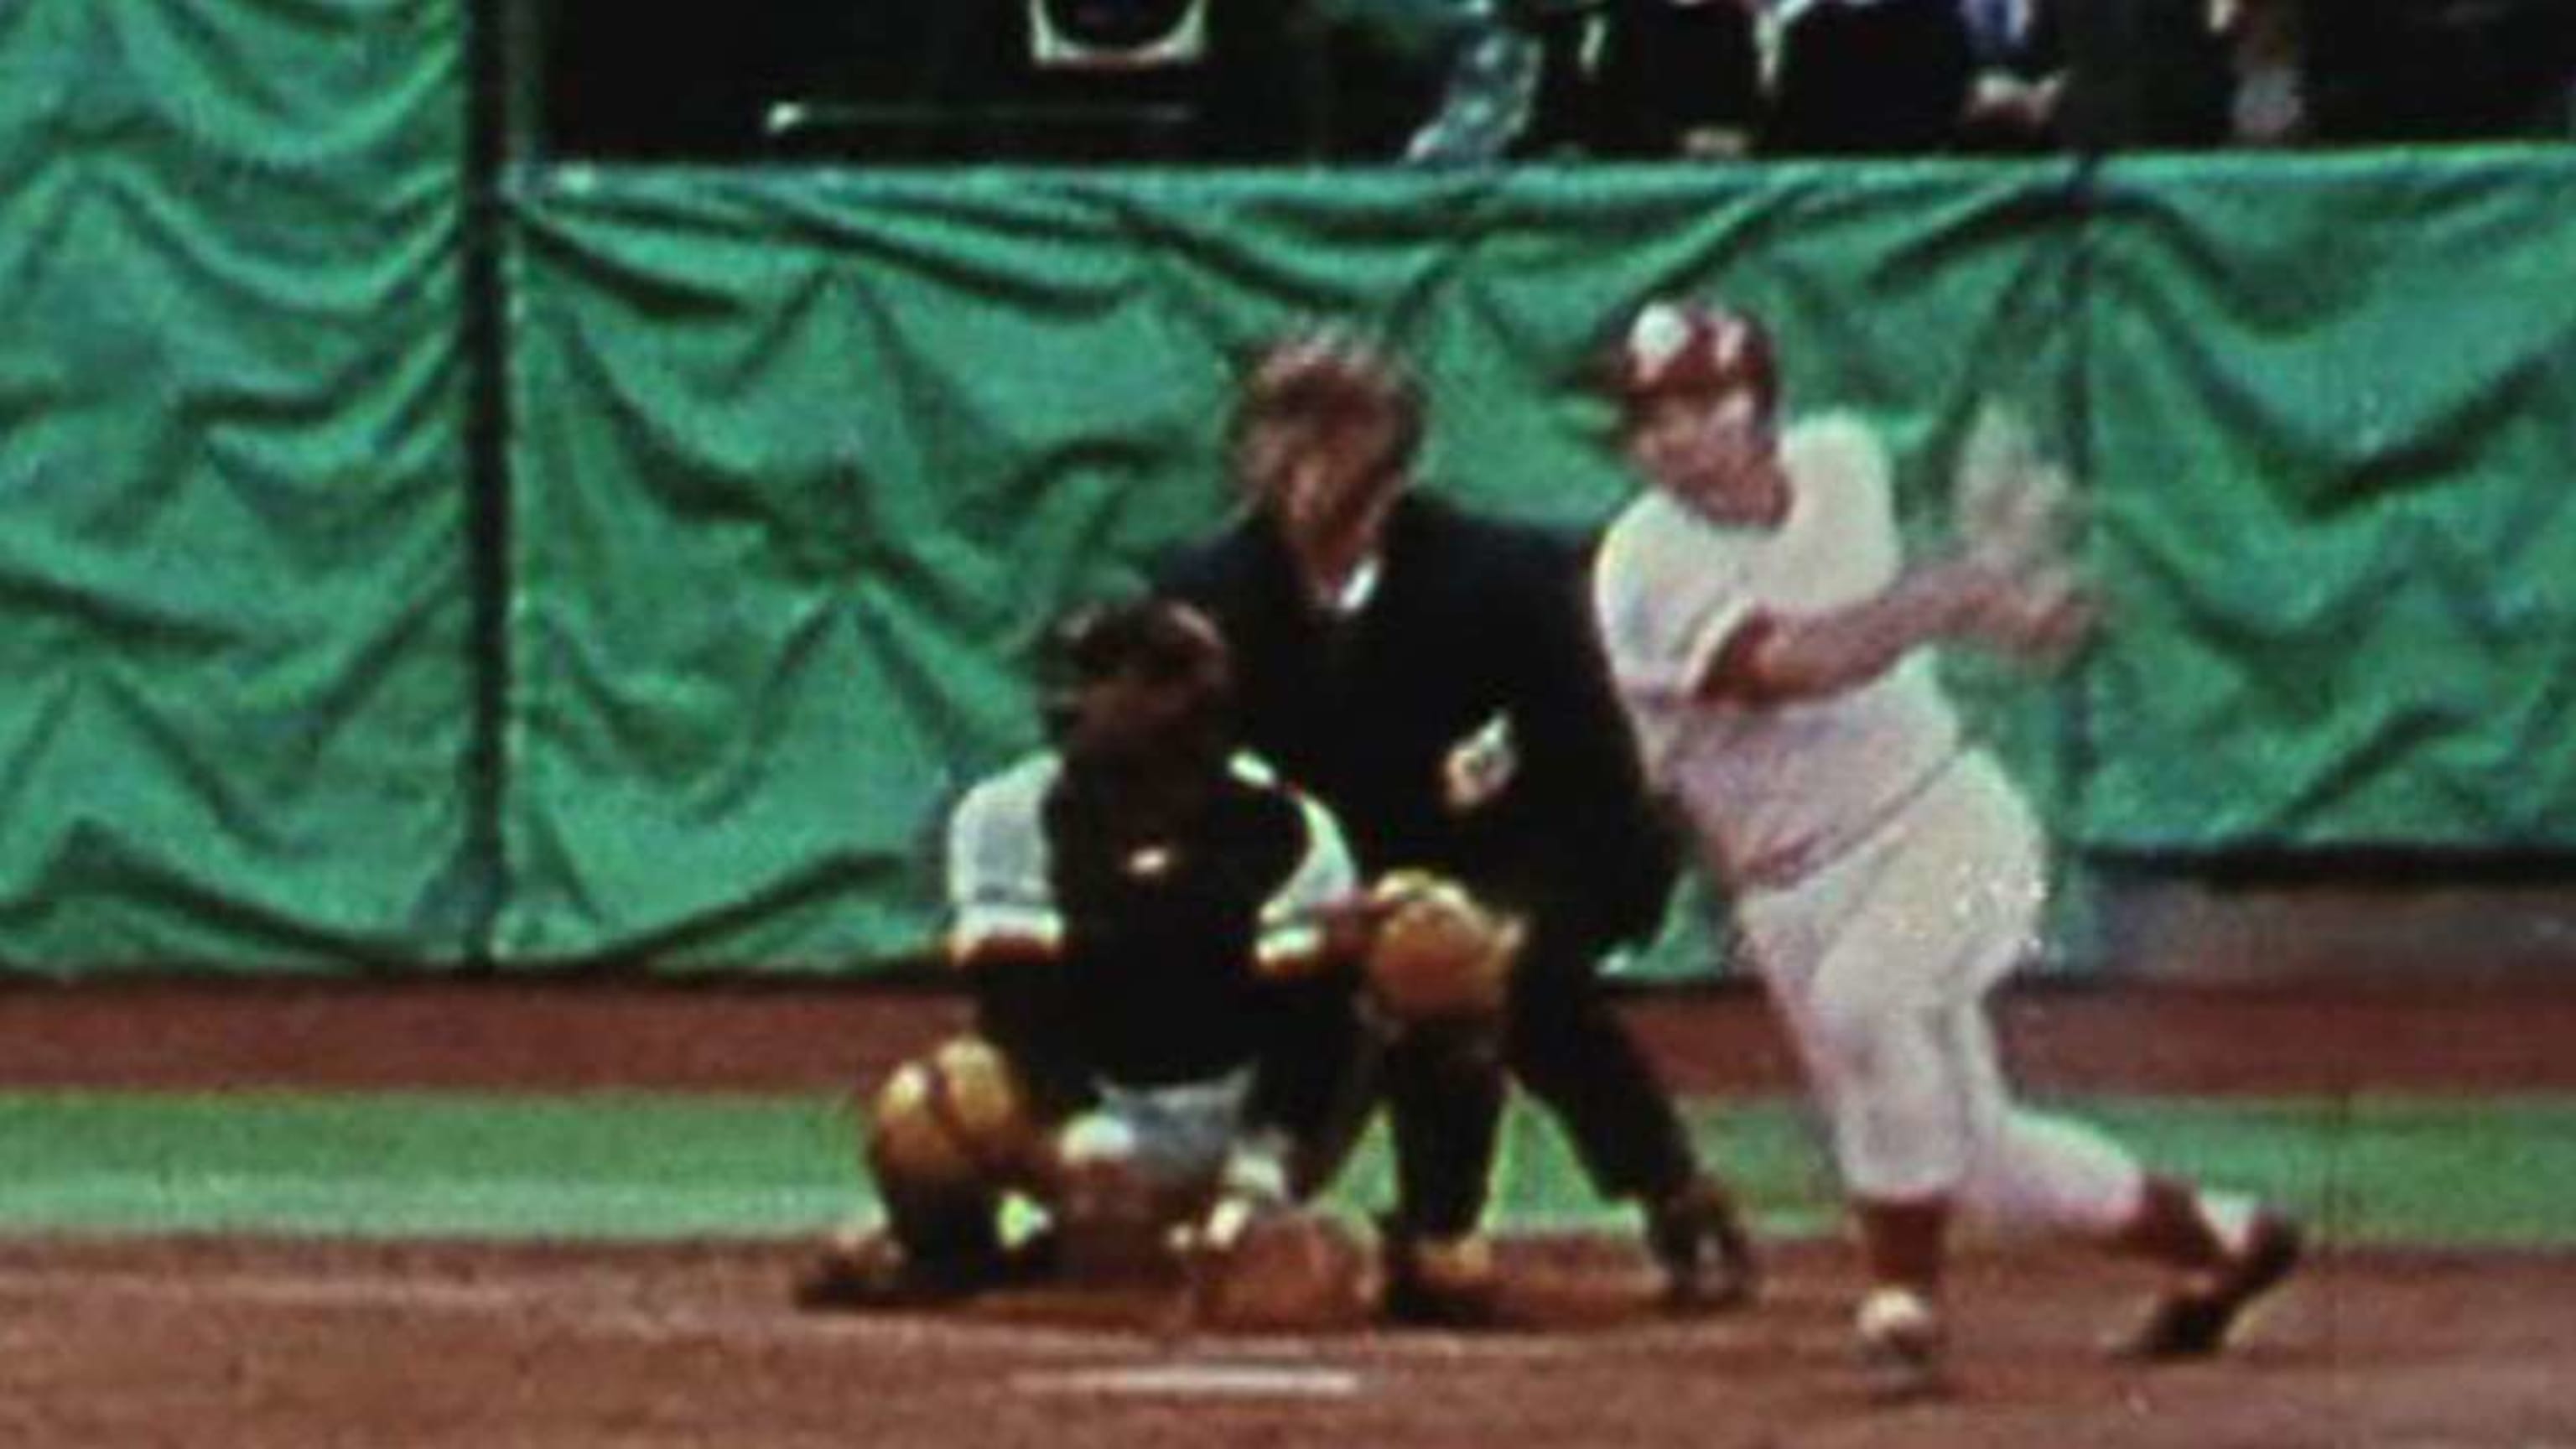 Johnny Bench (MLB Catcher) - On This Day